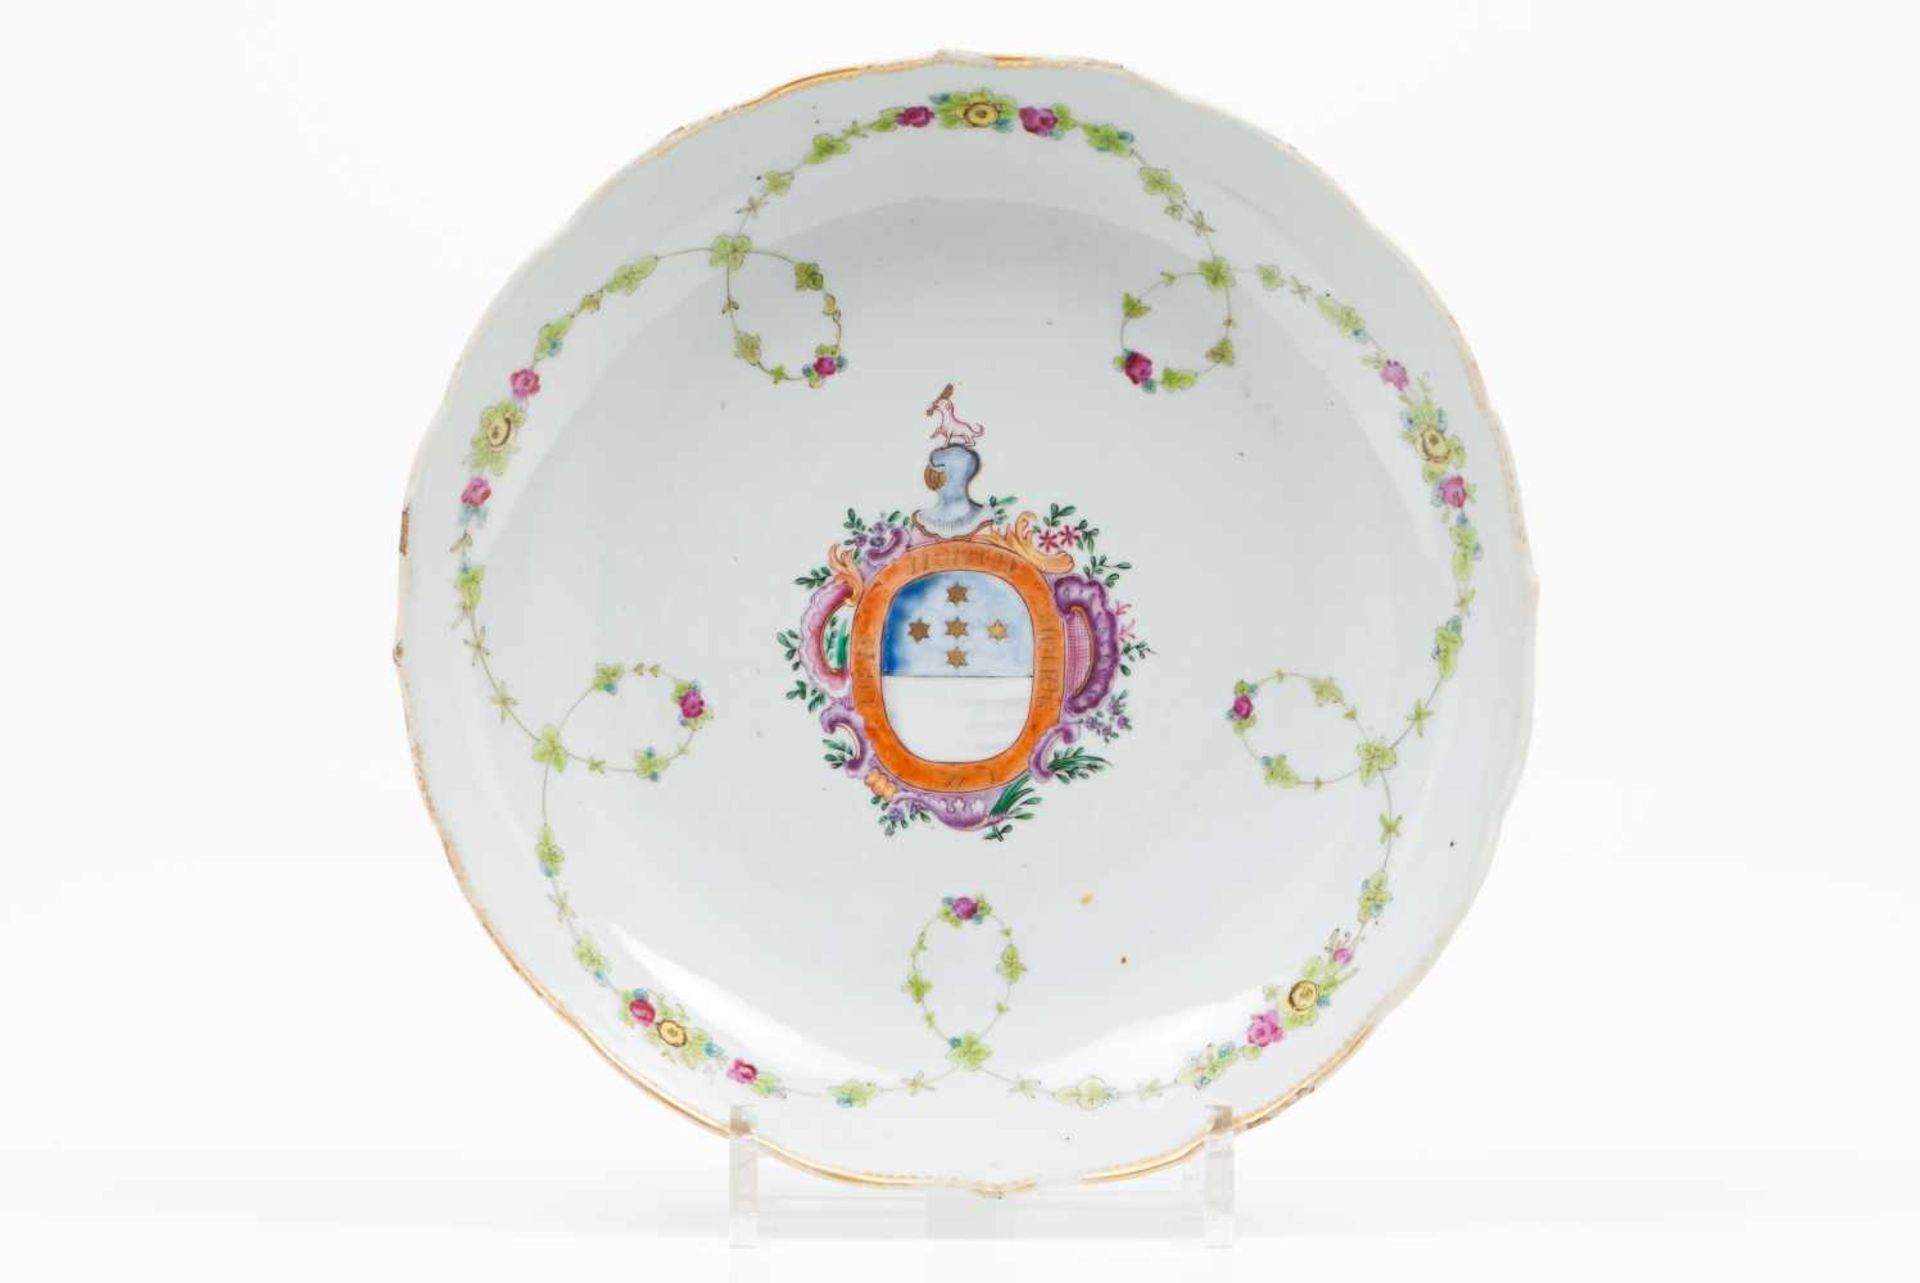 A scalloped rim plateChinese export porcelainPolychrome and gilt decoration with armorial for